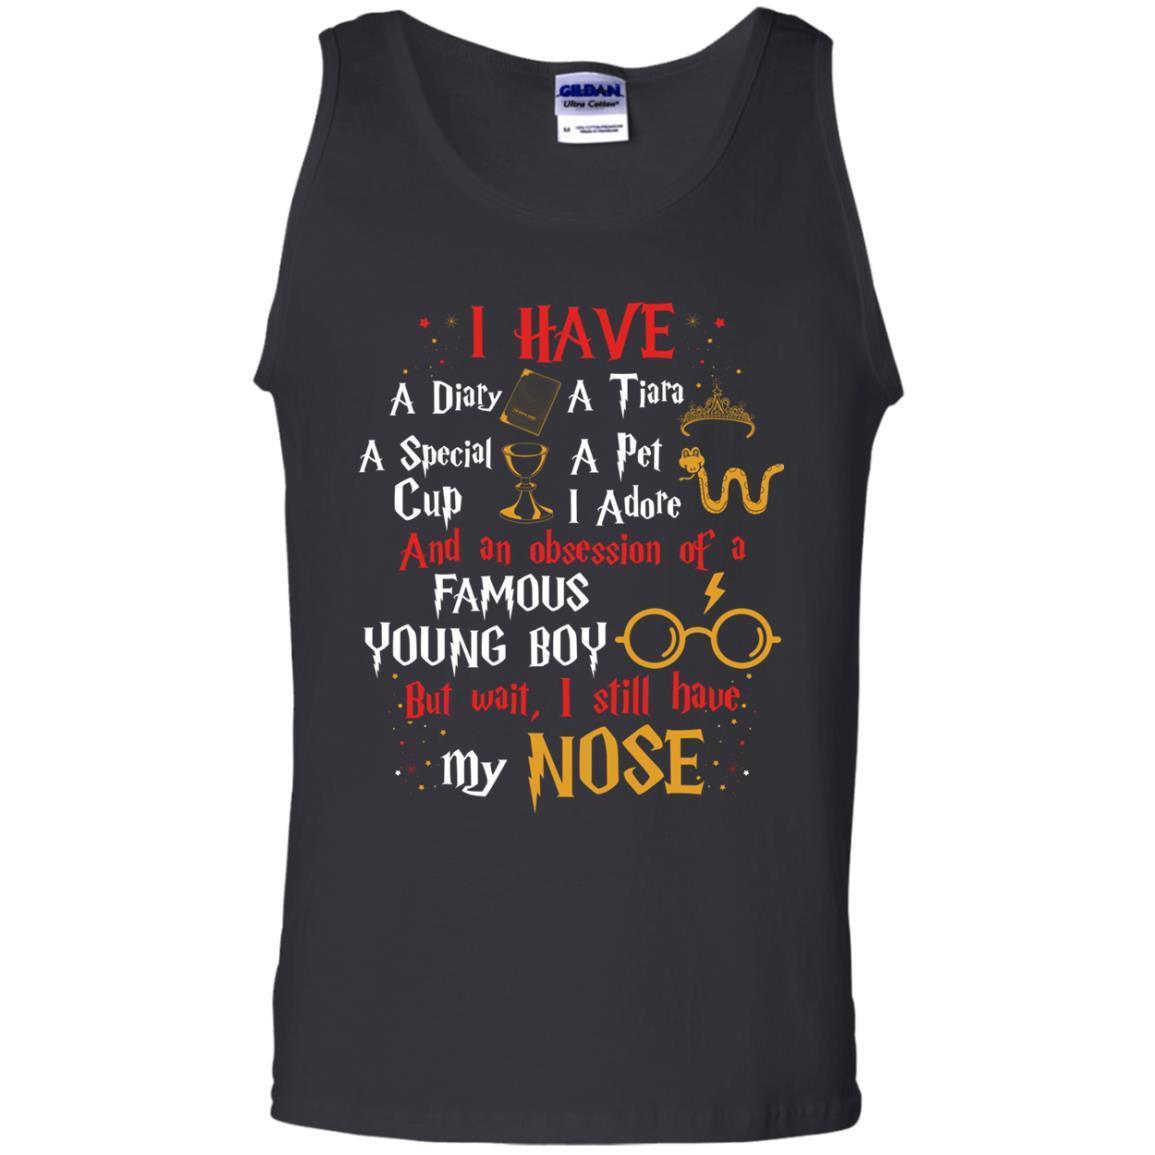 I Have A Diary, A Tiara, A Special Cup, A Pet I Adore And An Obsession Of A Famous Young Boy Harry Potter Fan T-shirtG220 Gildan 100% Cotton Tank Top